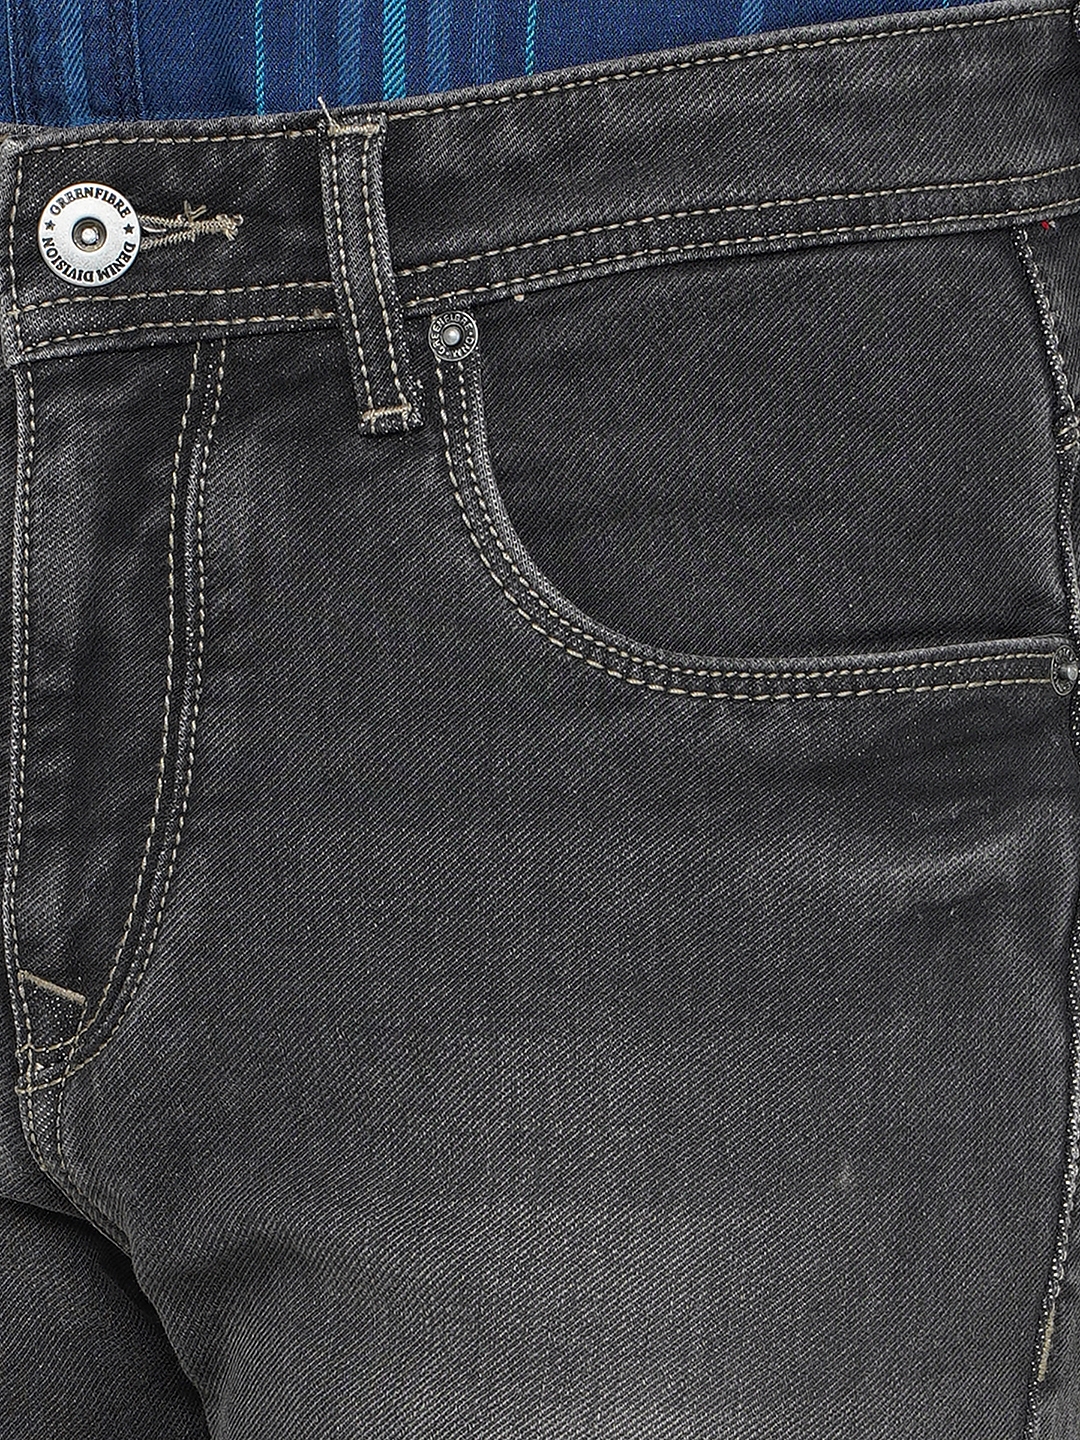 Greenfibre | Black Washed Urban Fit Jeans | Greenfibre 4